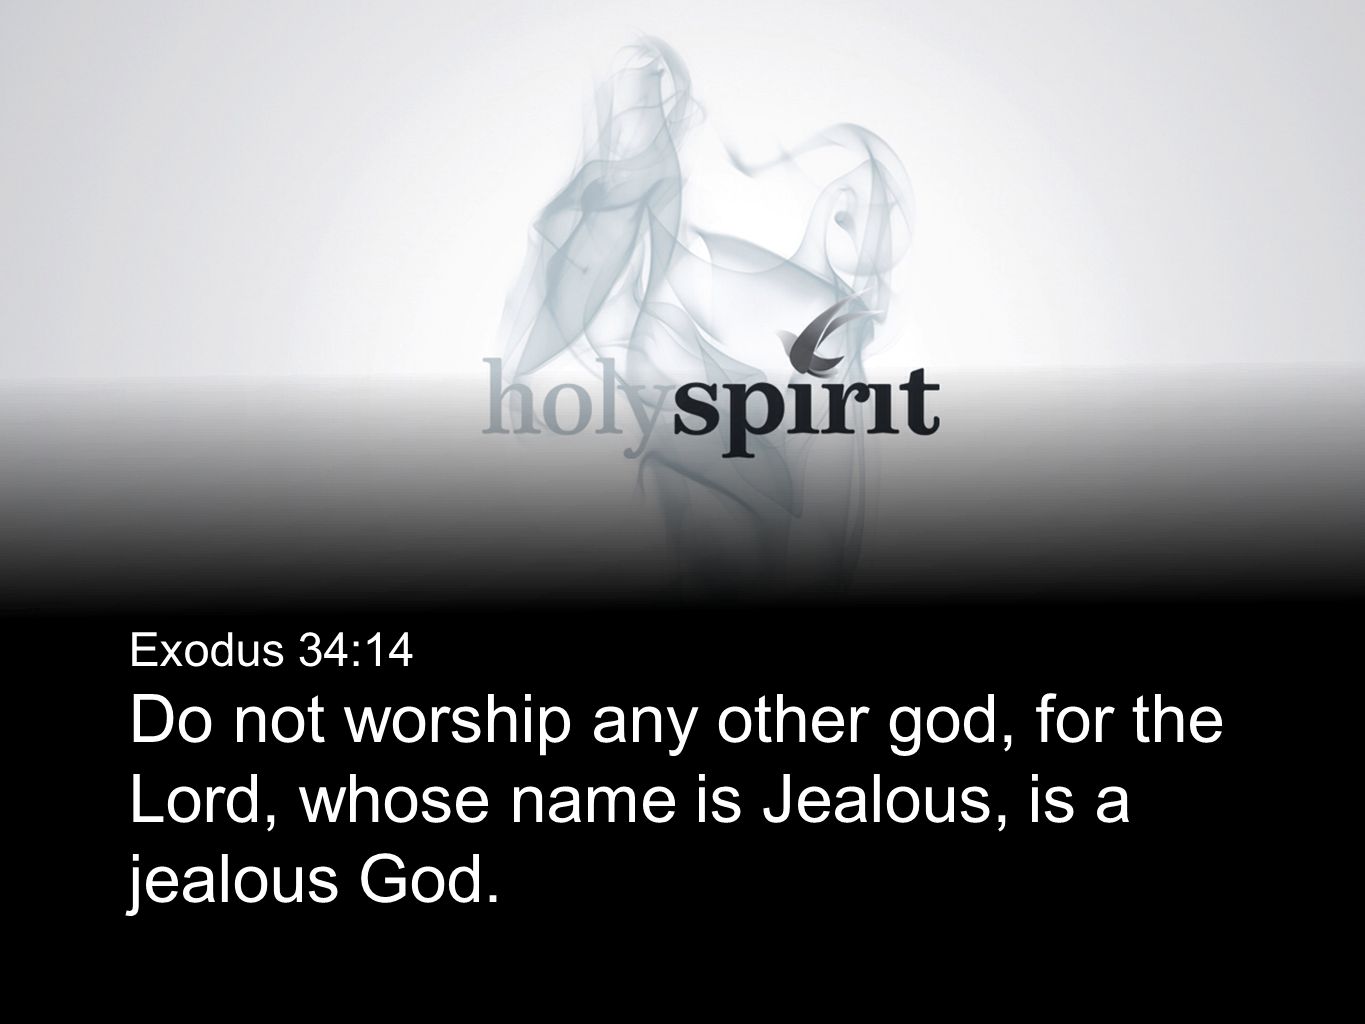 Exodus 34:14 Do not worship any other god, for the Lord, whose name is Jealous, is a jealous God.